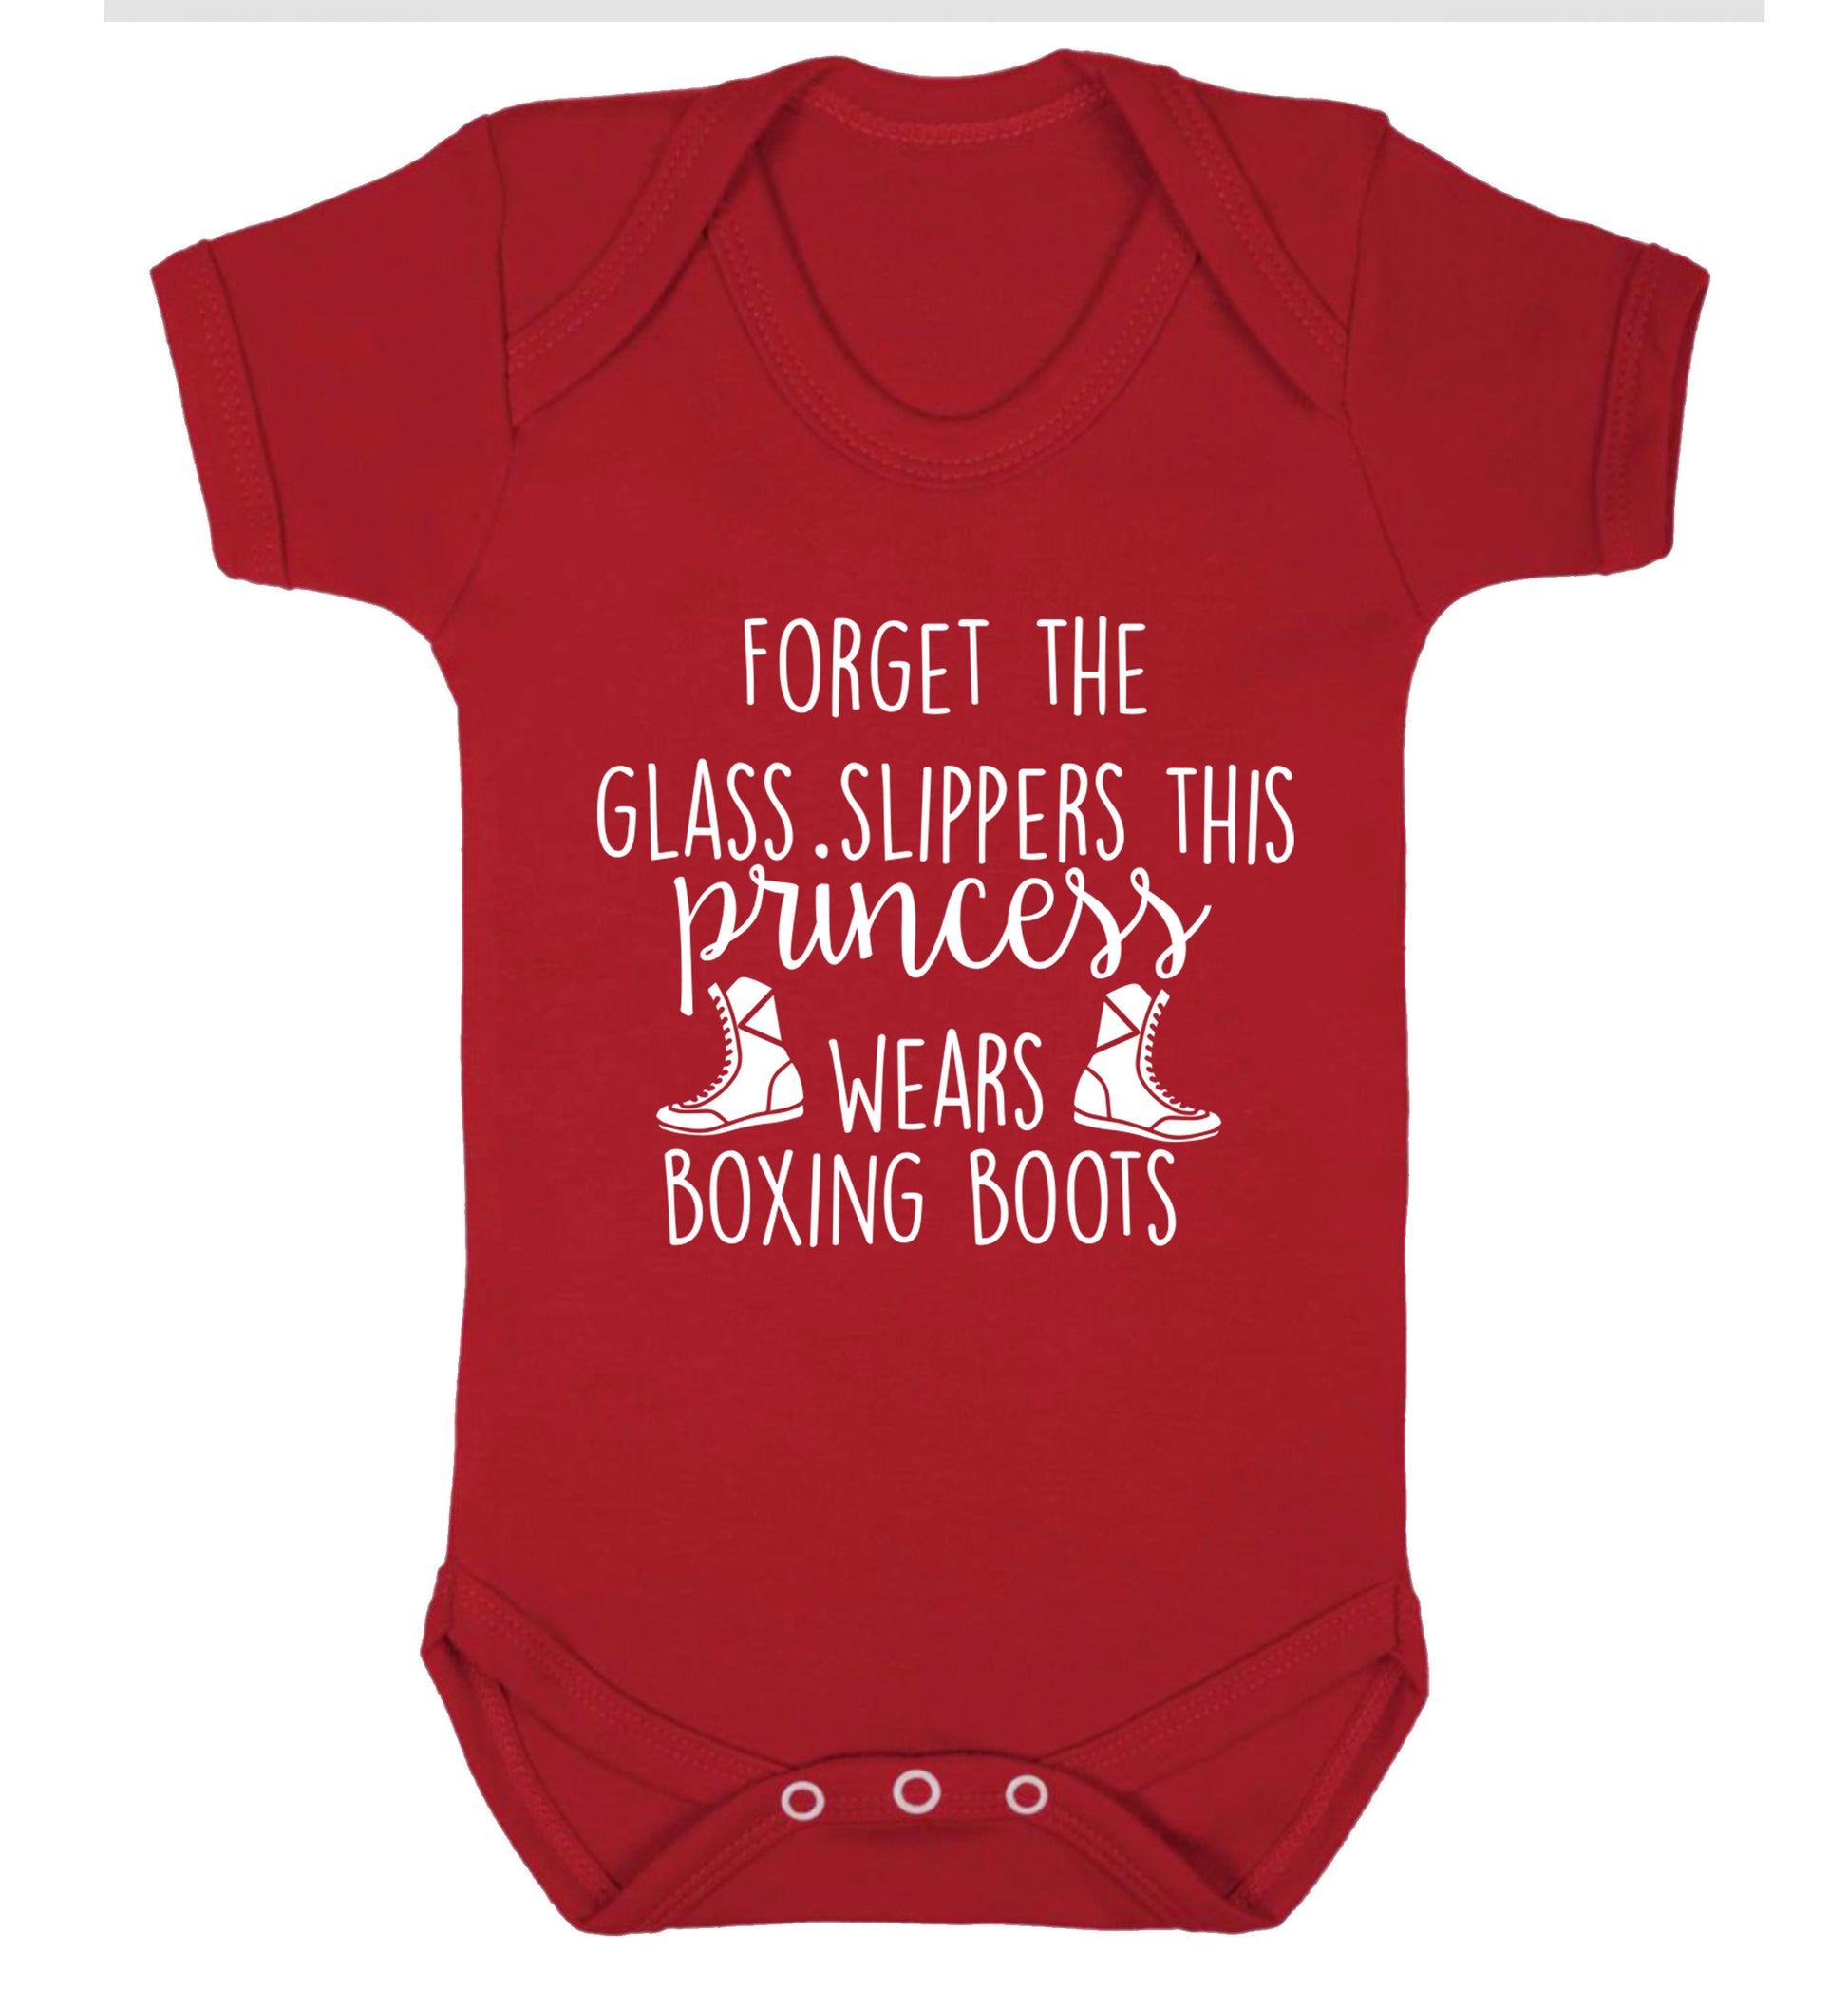 Forget the glass slippers this princess wears boxing boots Baby Vest red 18-24 months